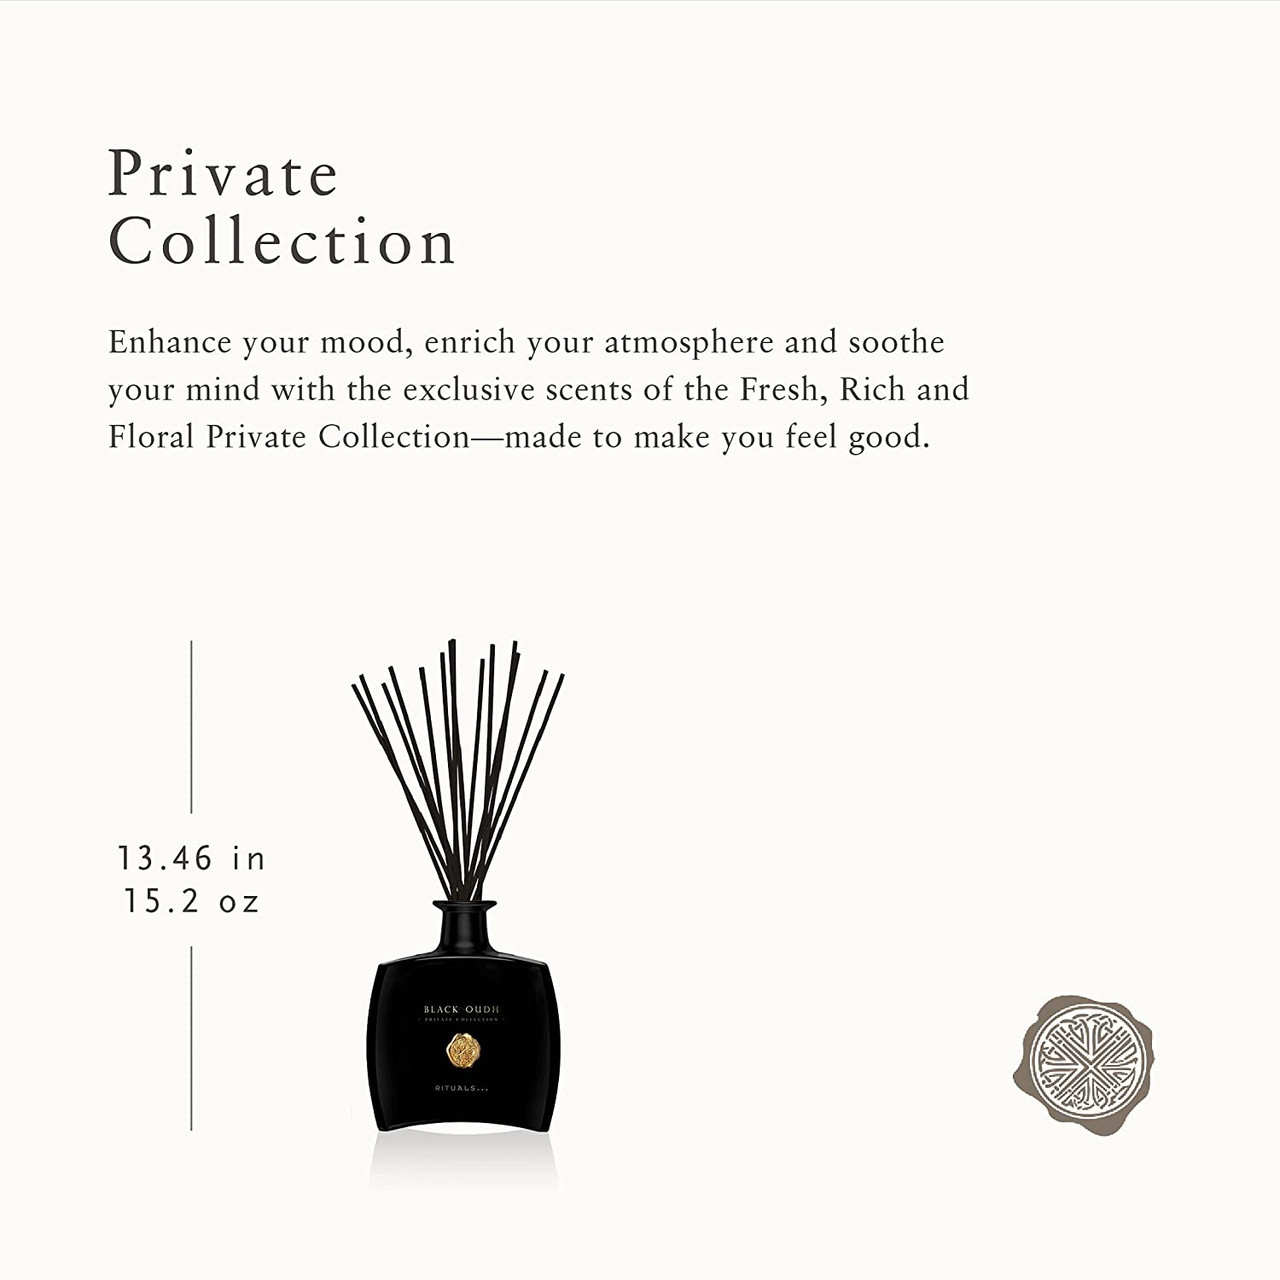 RITUALS Black Oudh Luxury Oil Reed Diffuser Set - Fragrance Sticks with  Black Oudh & Patchouli - 15.2